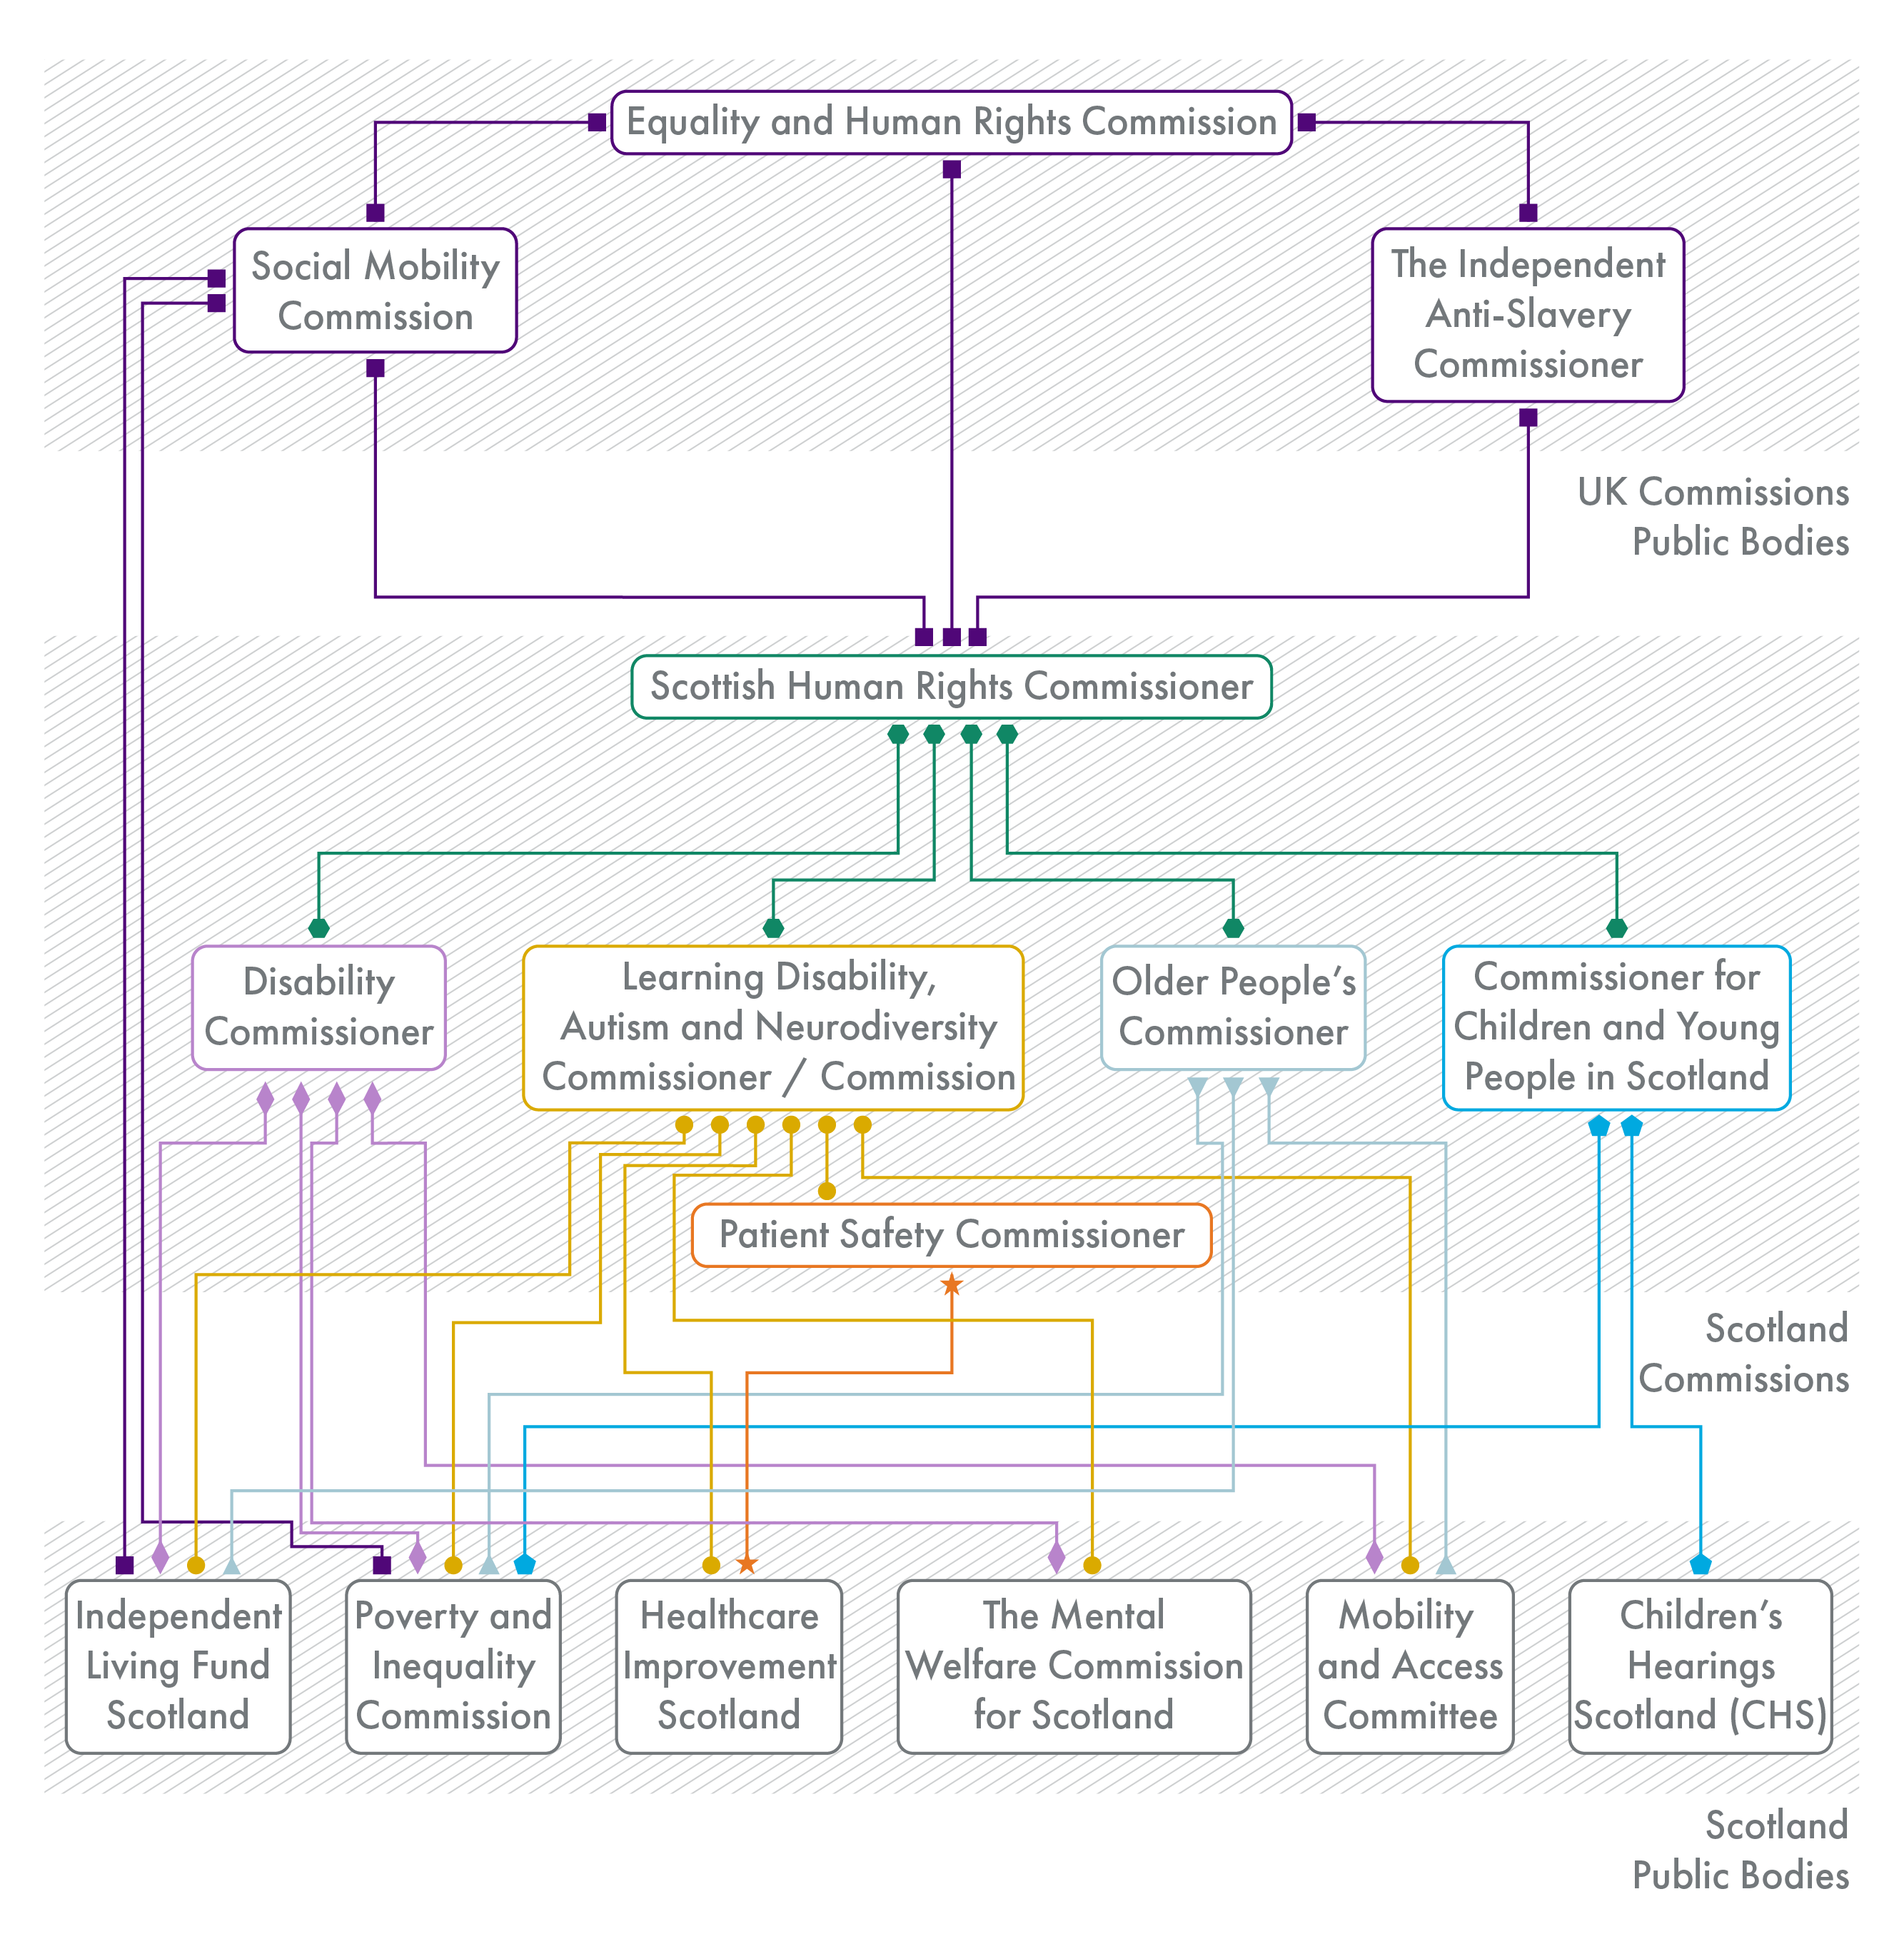 A flow chart showing the potential duplication of functions and duties between UK Commissions, UK Public Bodies, Scottish Commissions, and Scottish Public Bodies.